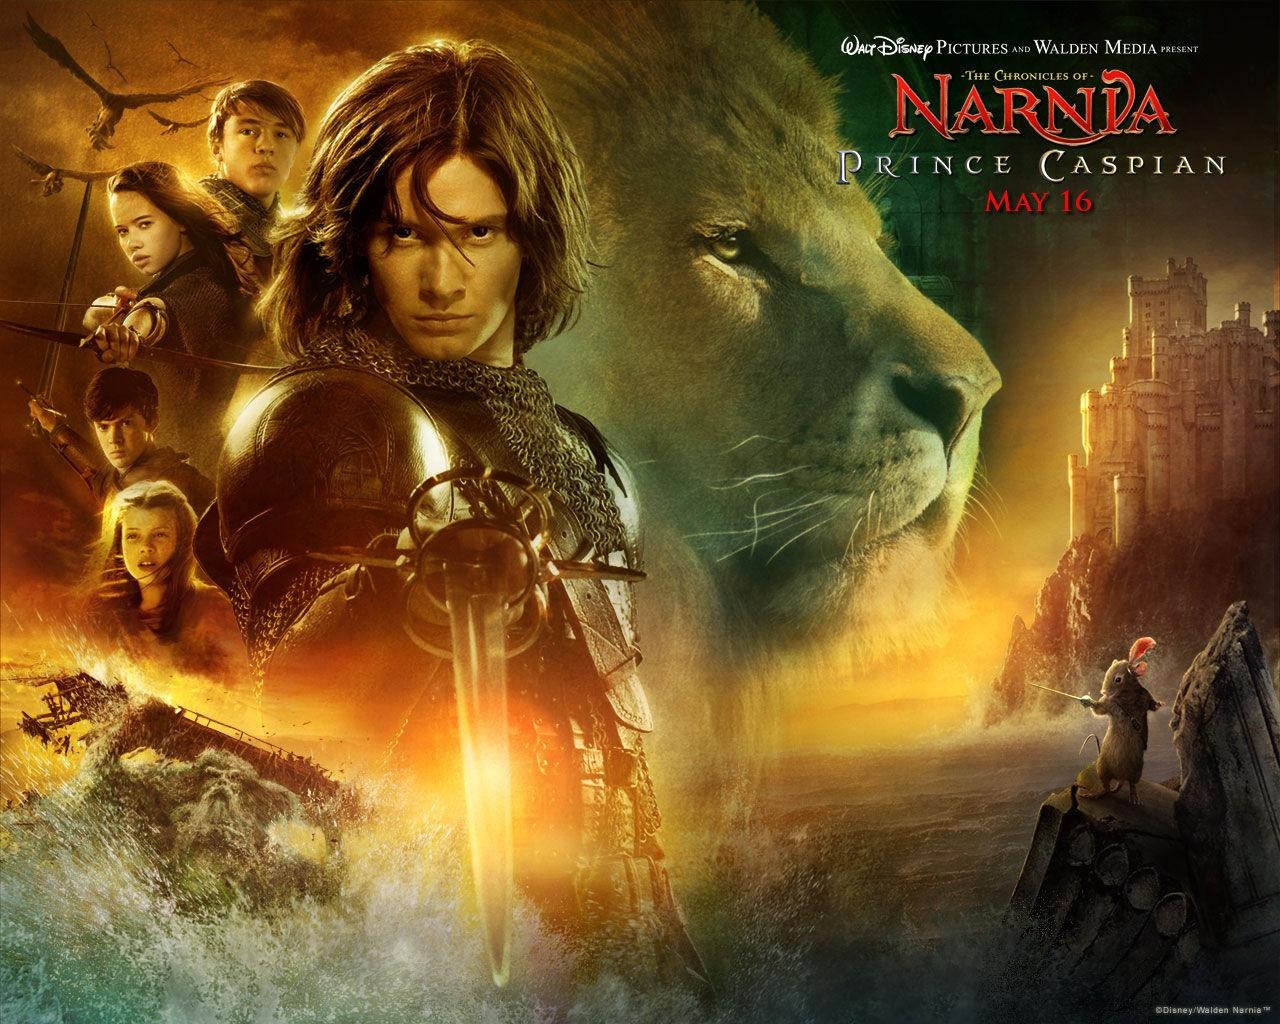 The Chronicles of Narnia 2: Prince Caspian #3 - 1280x1024